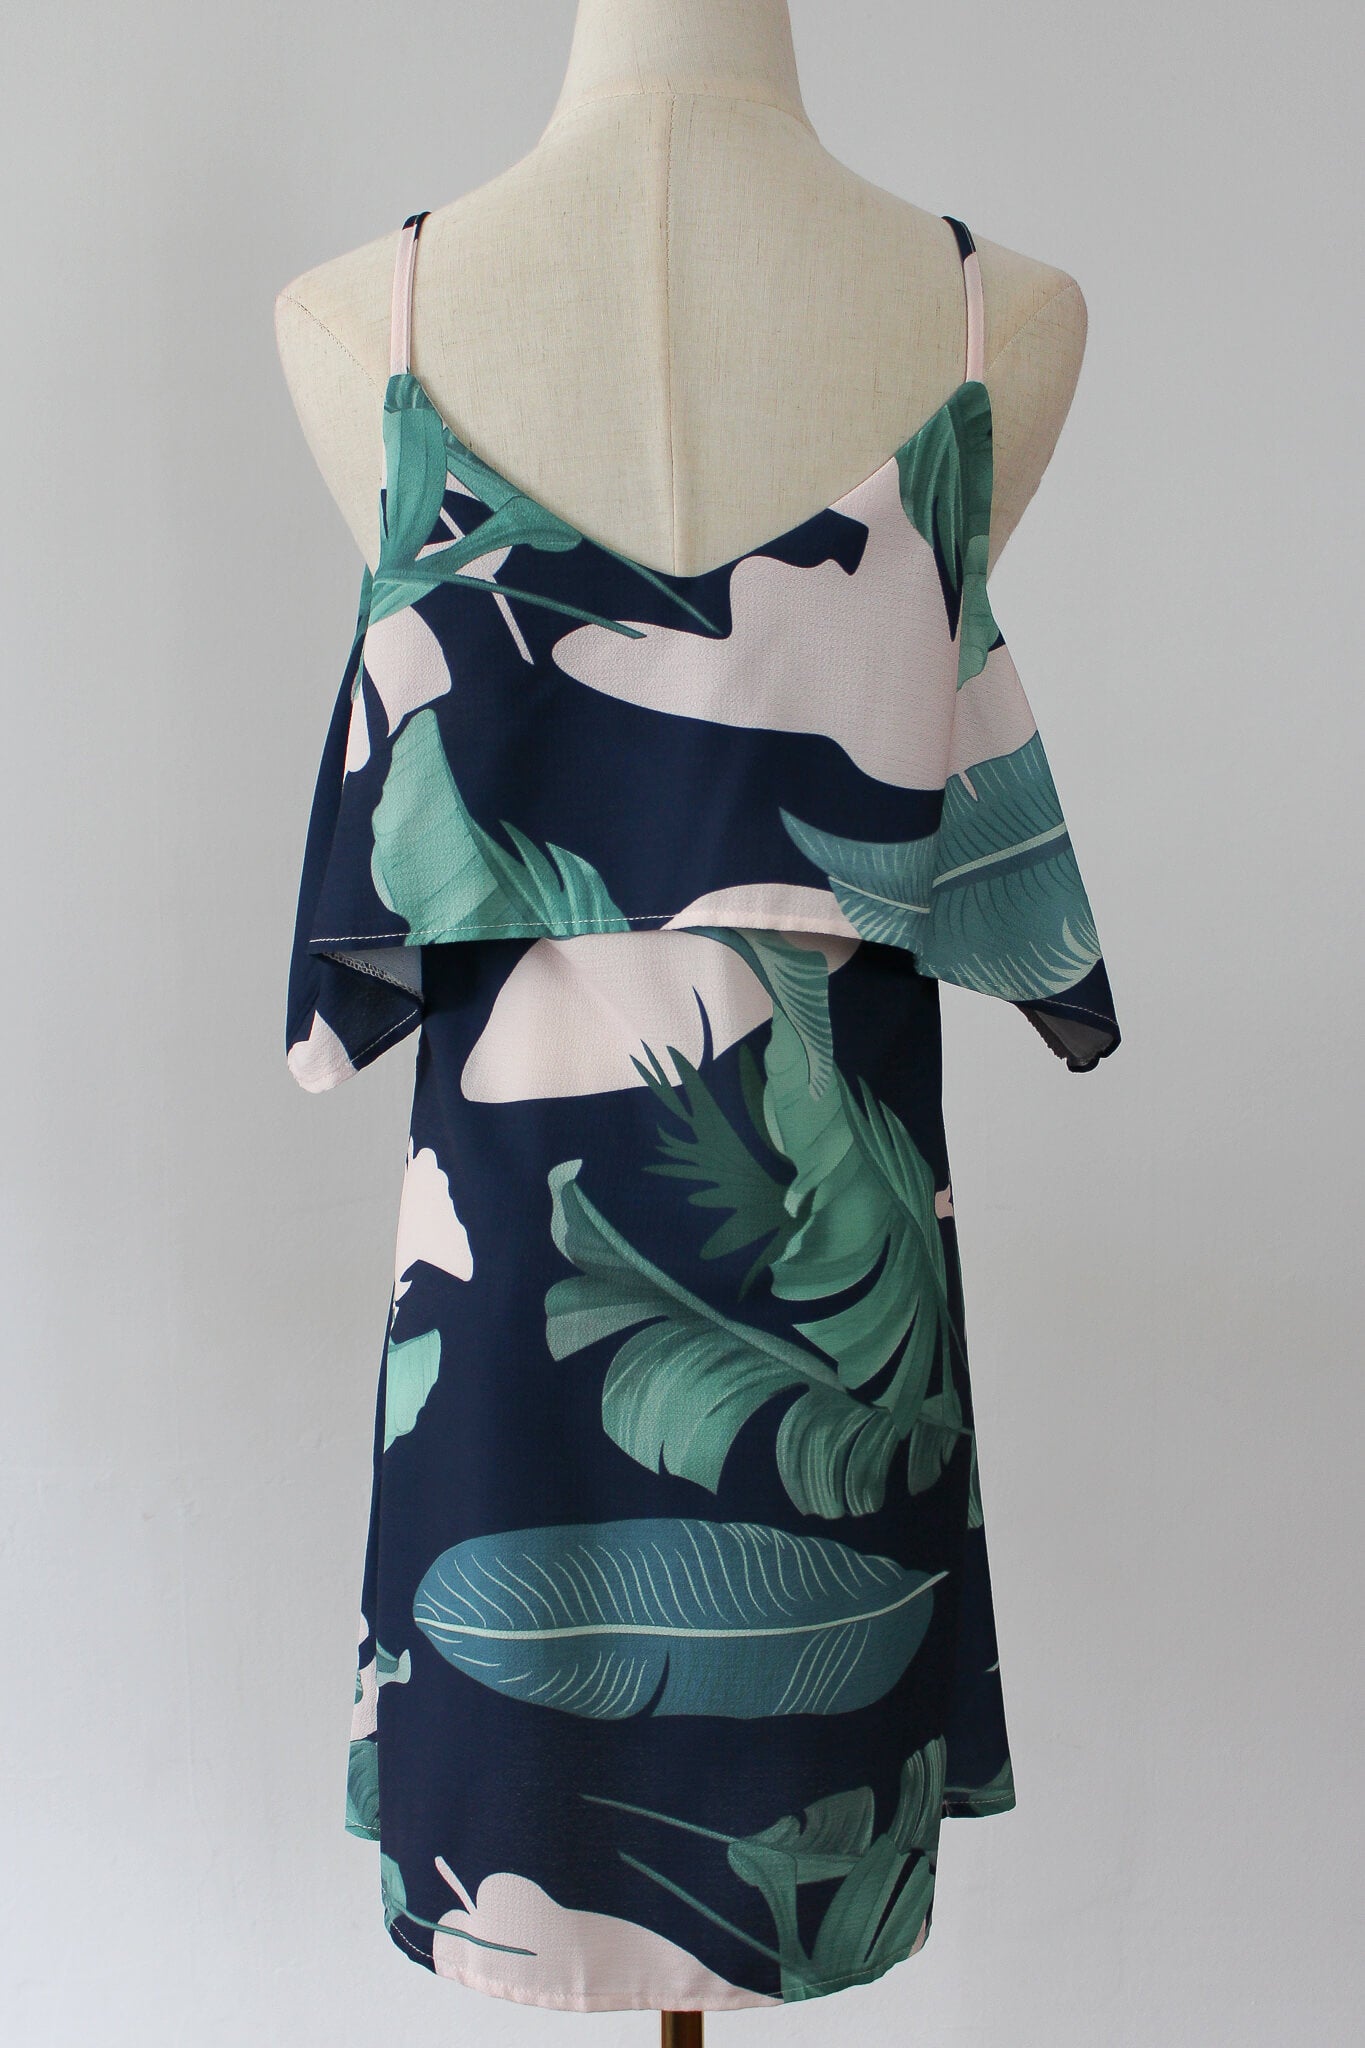 leaf printed loosely fitted cold shoulder dress. thin and lightweight material perfect for summer